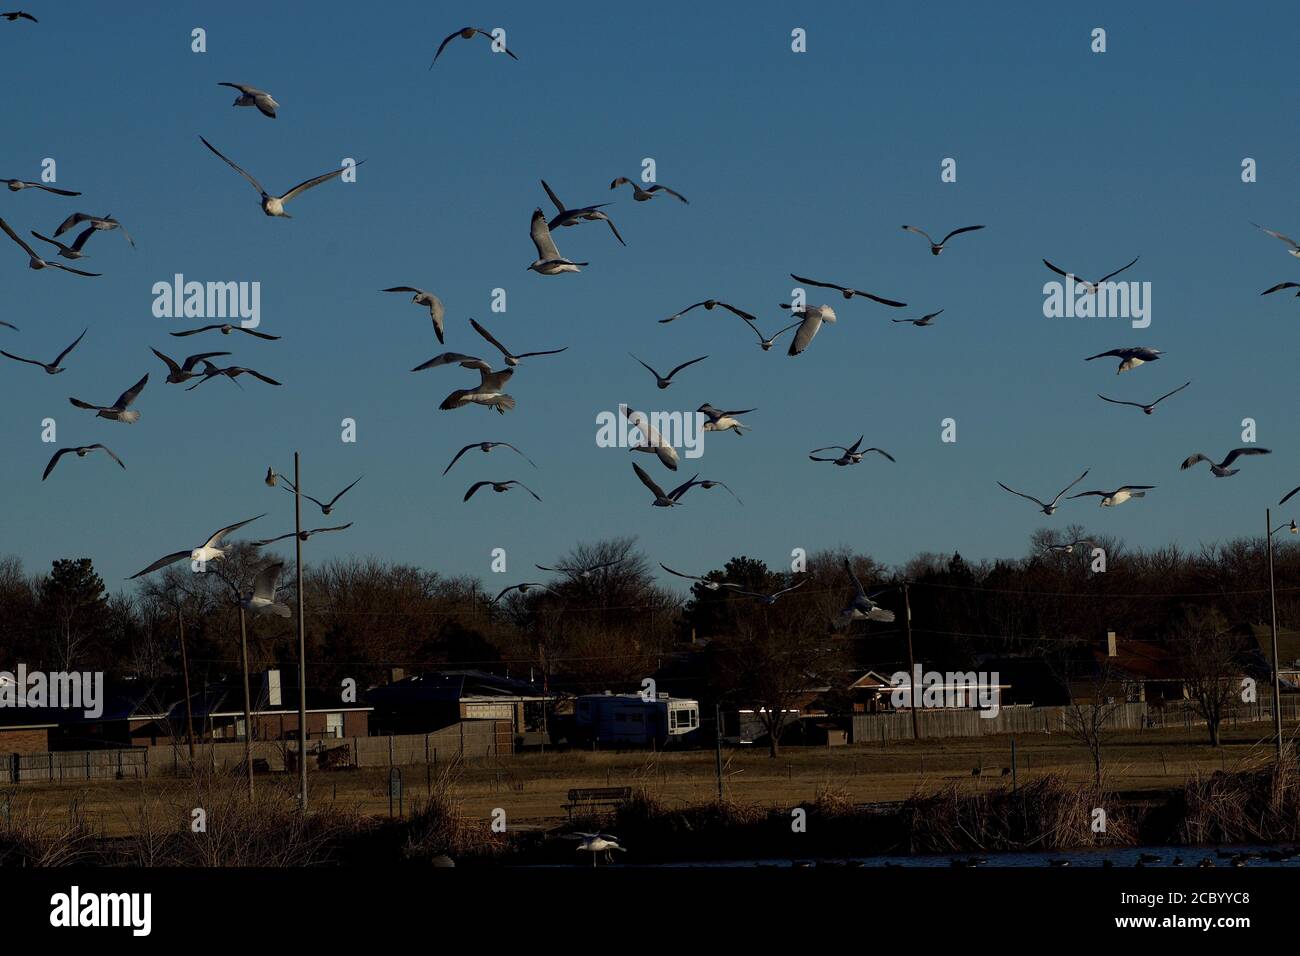 Flocking Franklin and Ring-billed Seagulls at South East City Park Public Fishing Lake, Canyon, Texas. Stock Photo